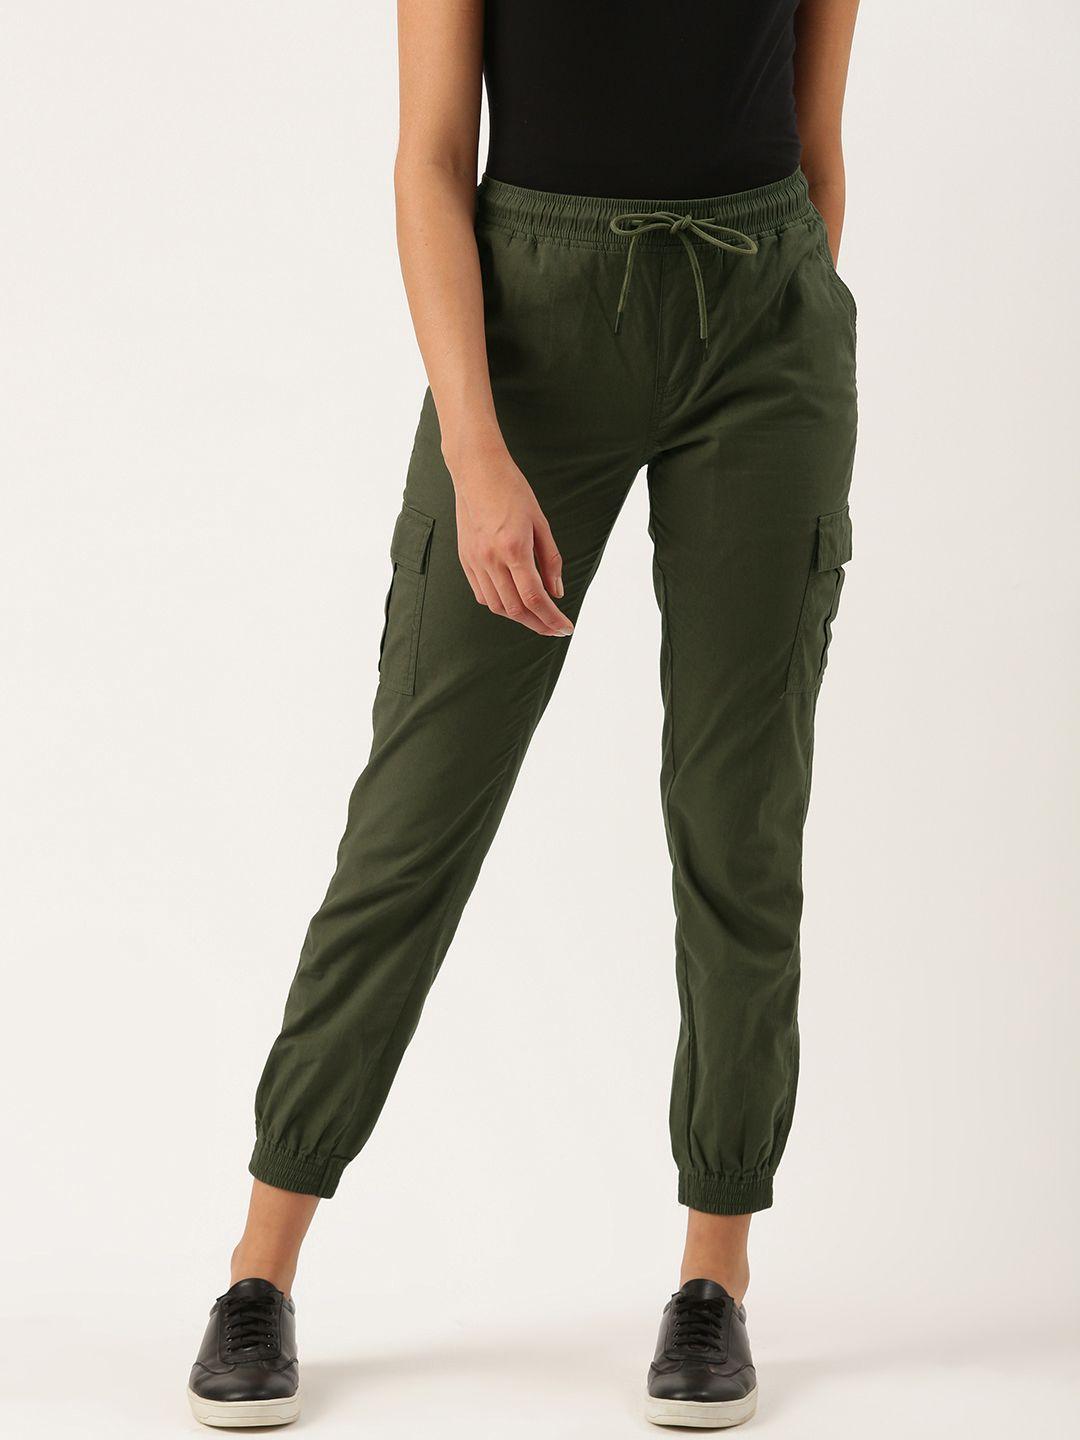 ivoc women olive green solid pure cotton regular fit mid-rise casual joggers